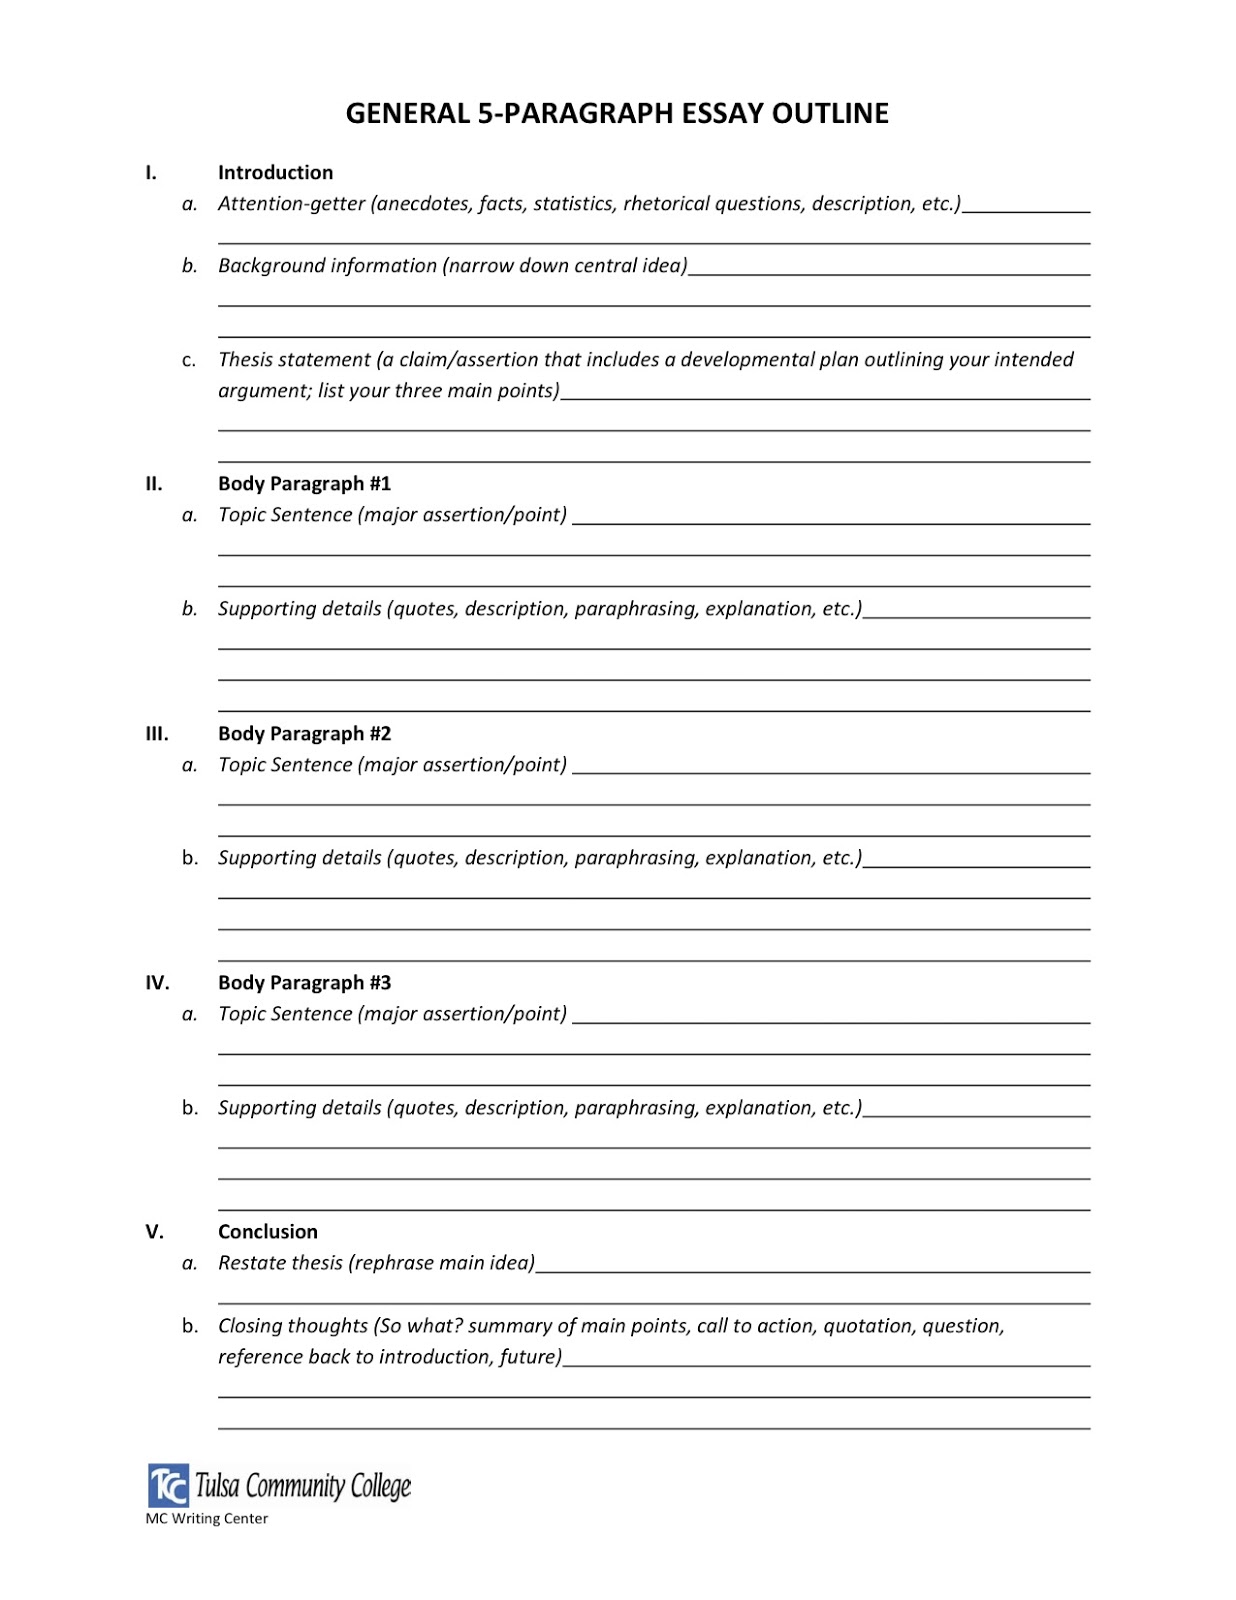 Outline template for essay printable